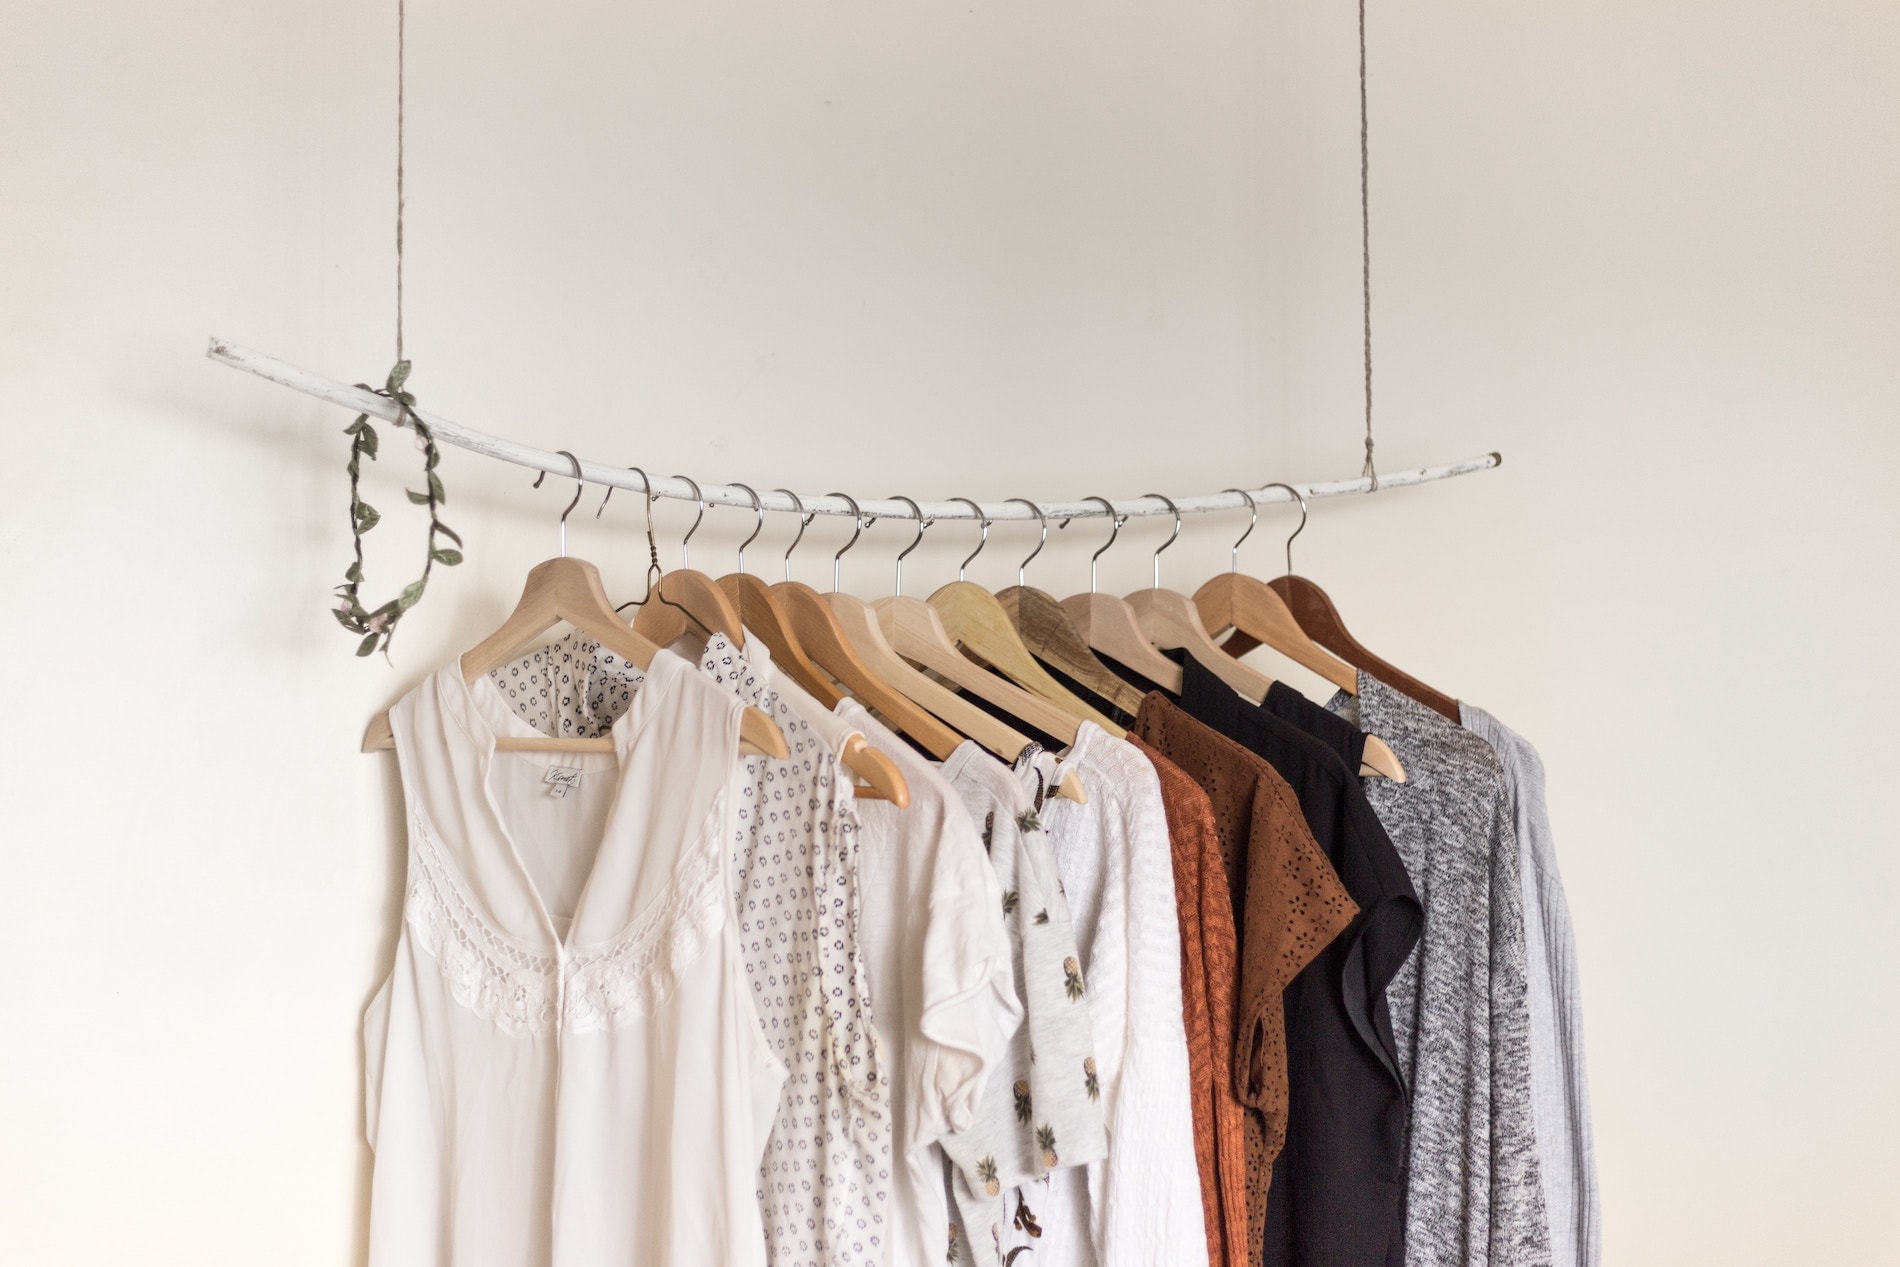 Capsule rack of garments hanging on a white wall